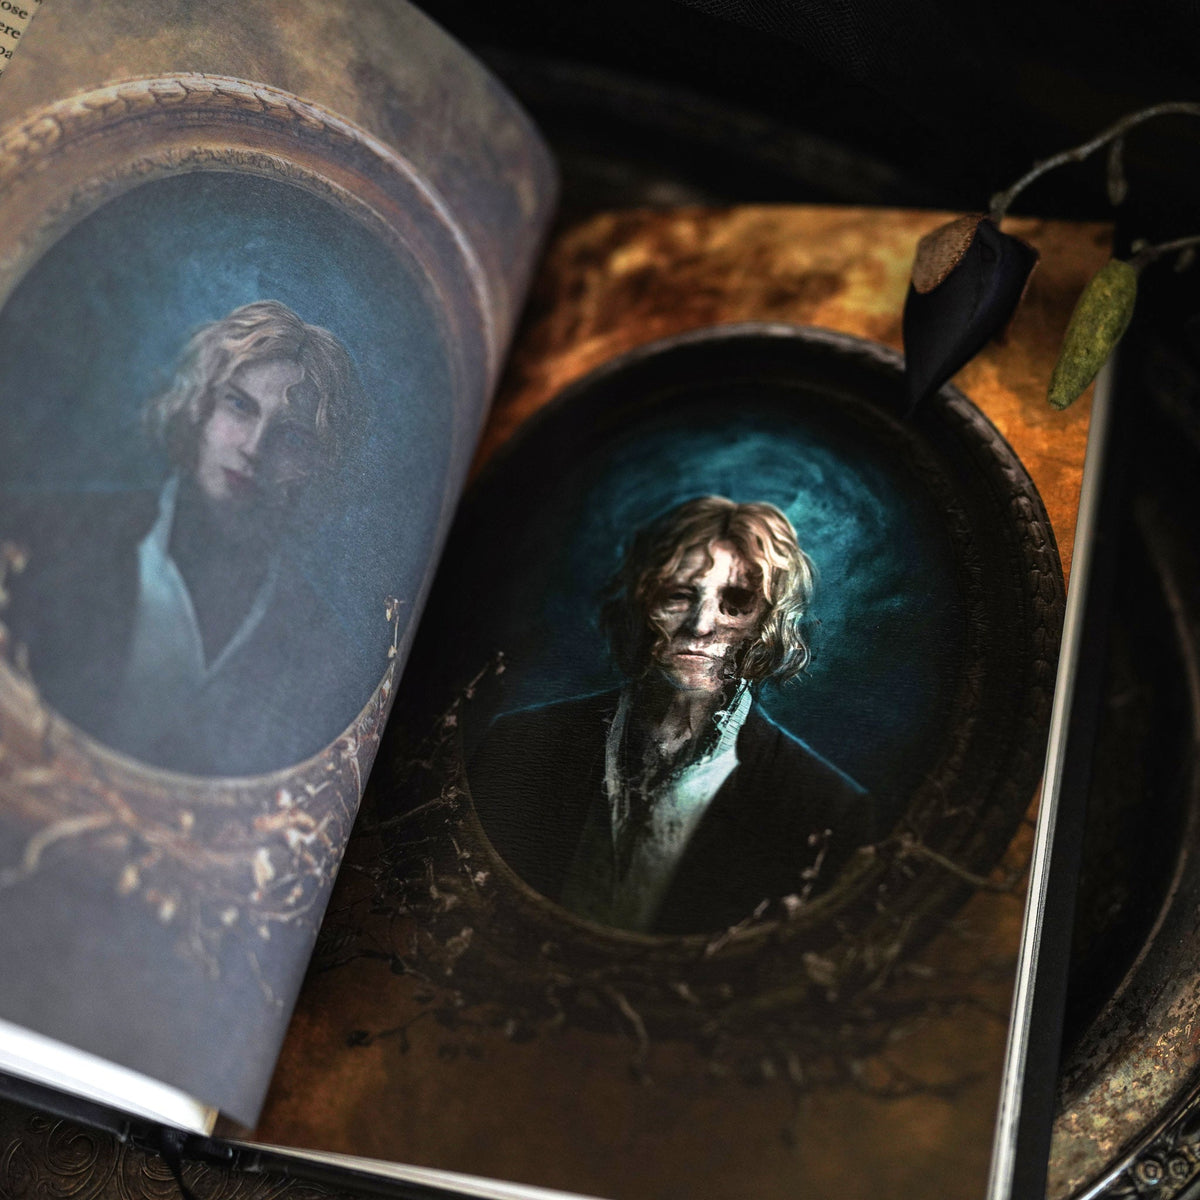 Gothic Horror Box Set with BONUS Slipcase from LitJoy Crate | Collectibles &amp; Gifts for Booklovers